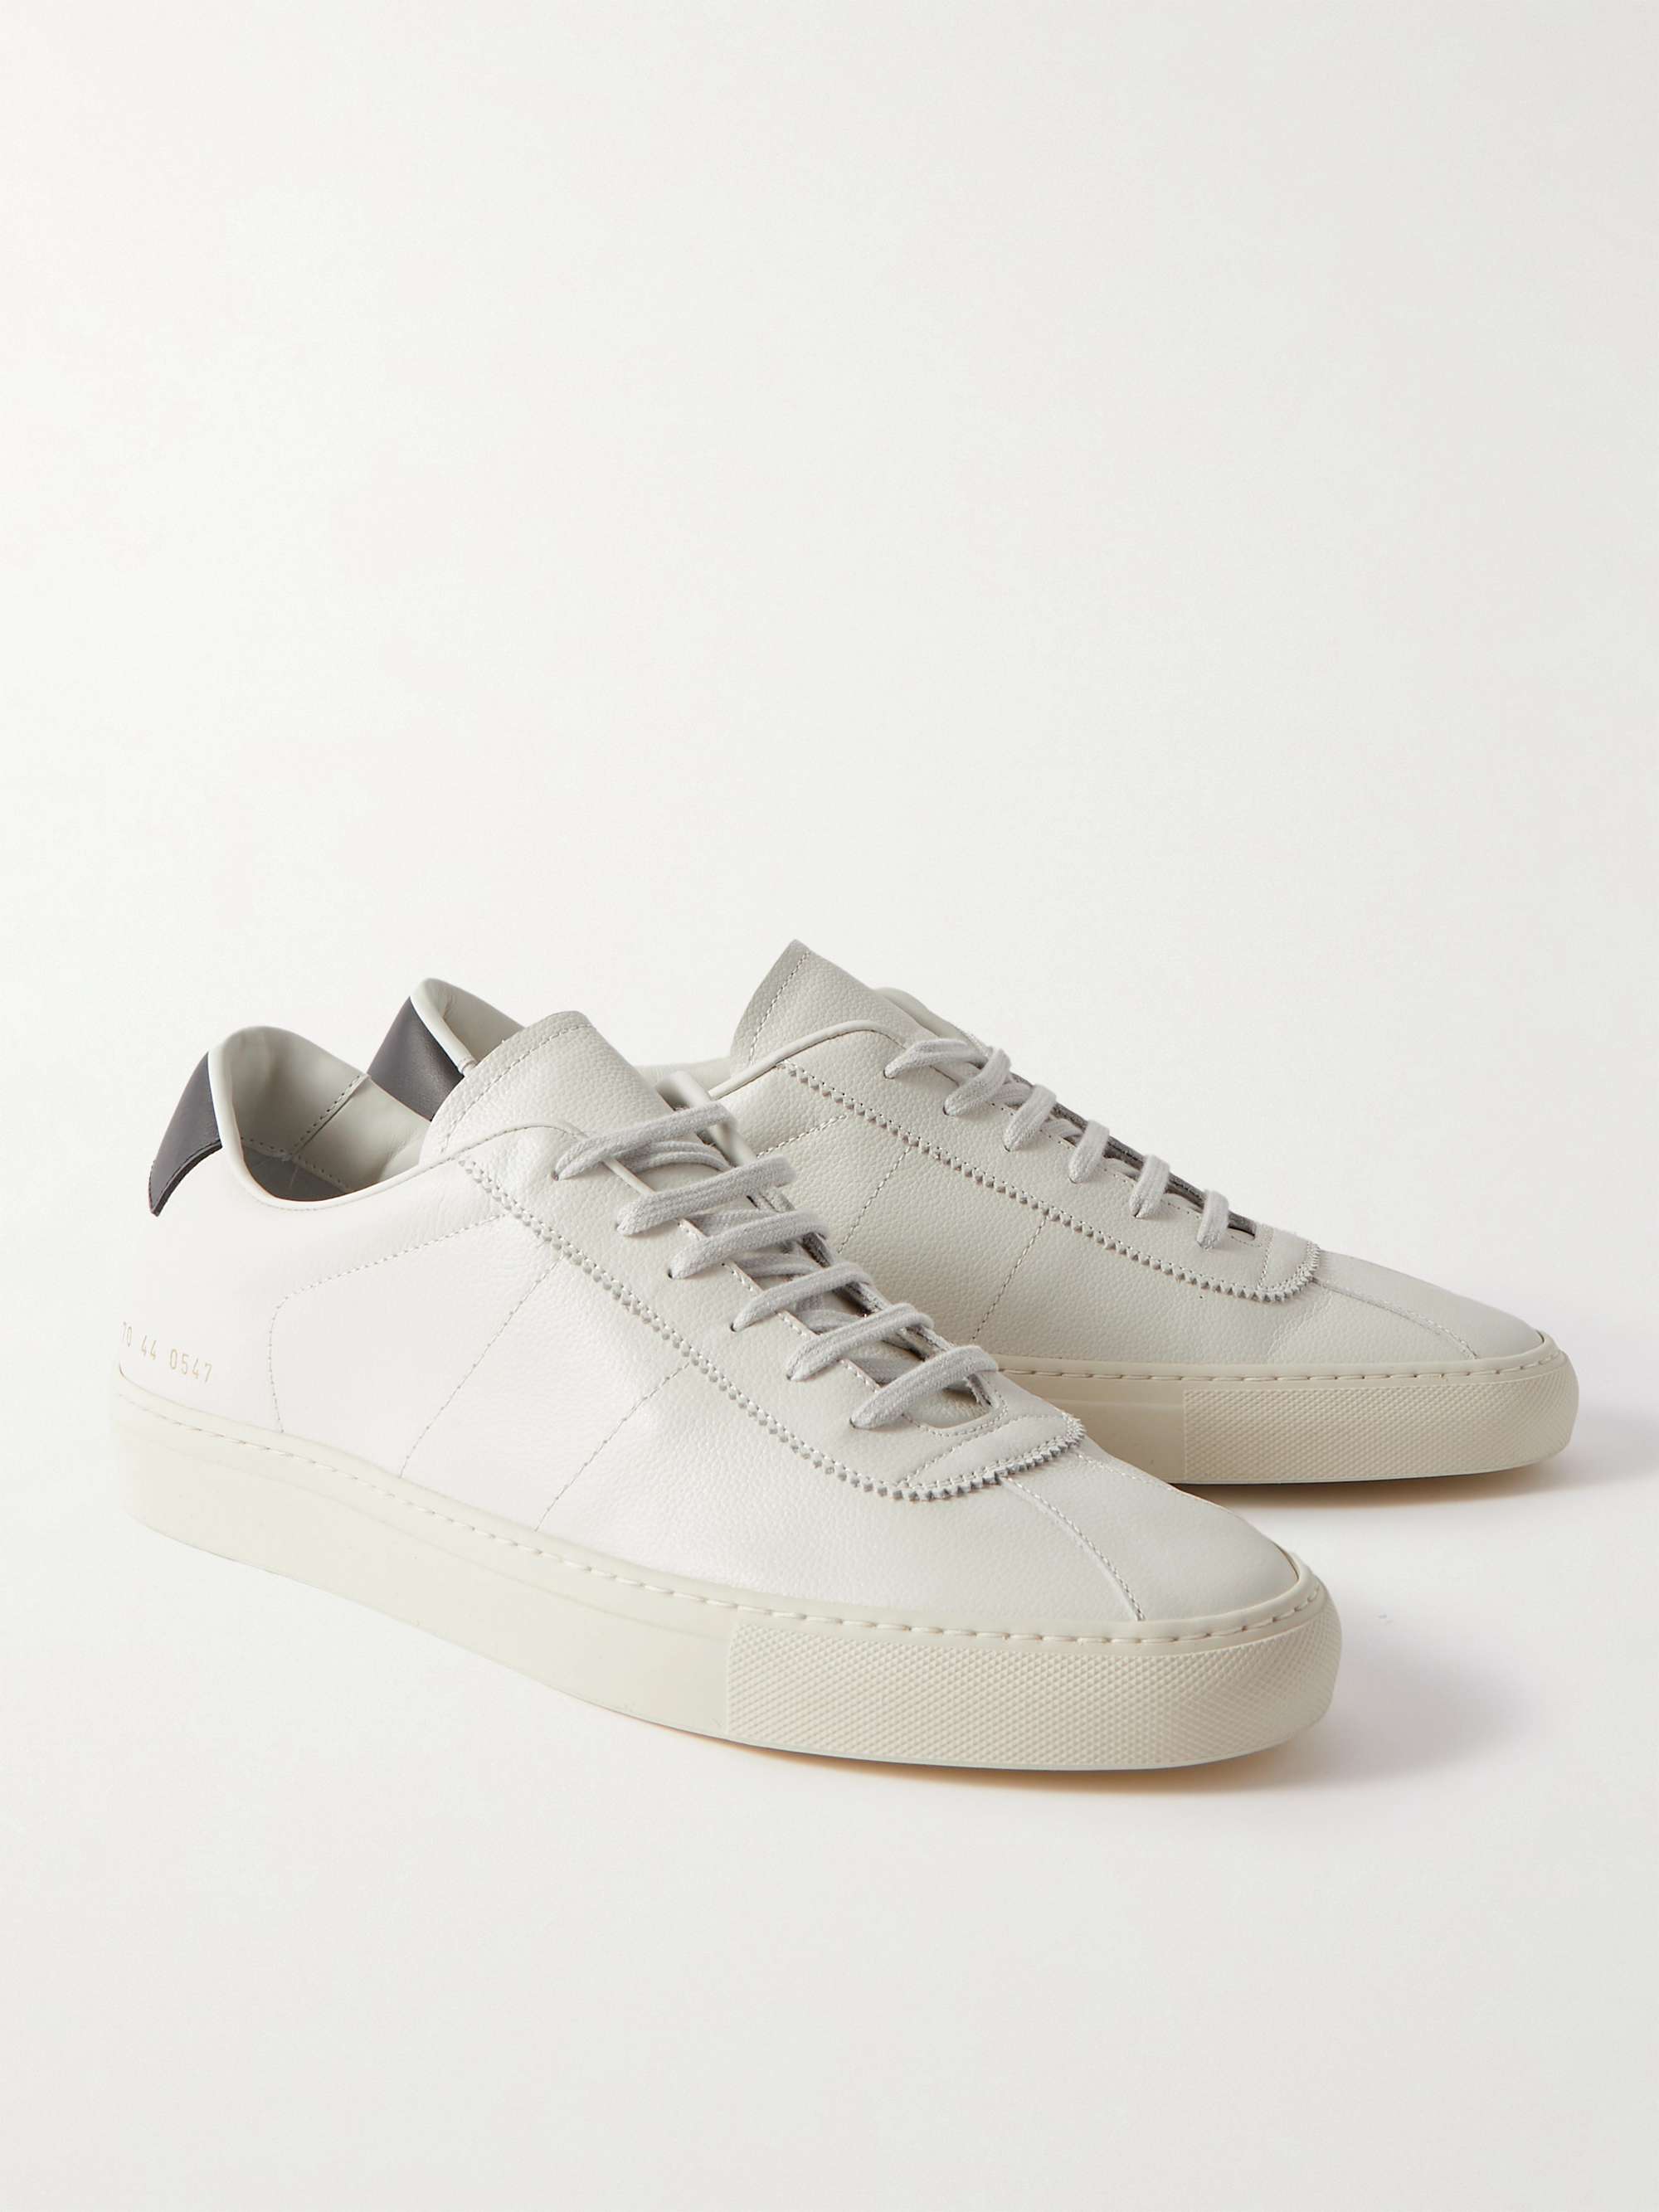 COMMON PROJECTS Tennis 77 Leather Sneakers | MR PORTER